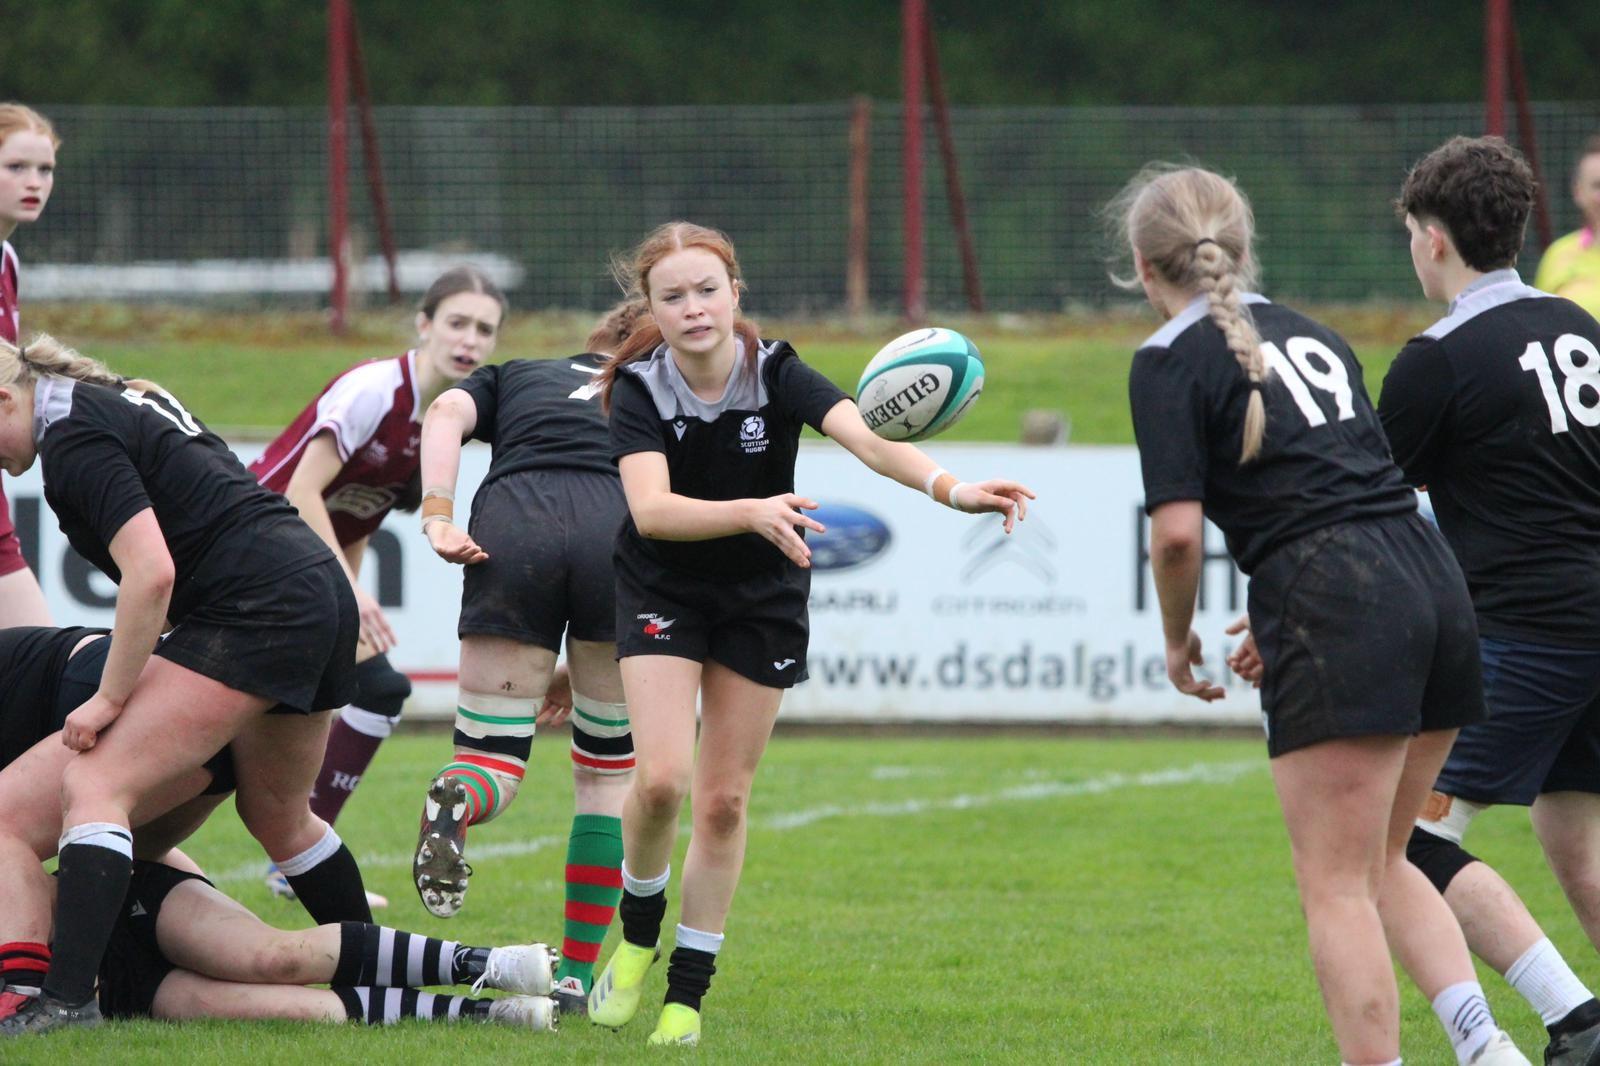 Cailynn Williamson playing rugby